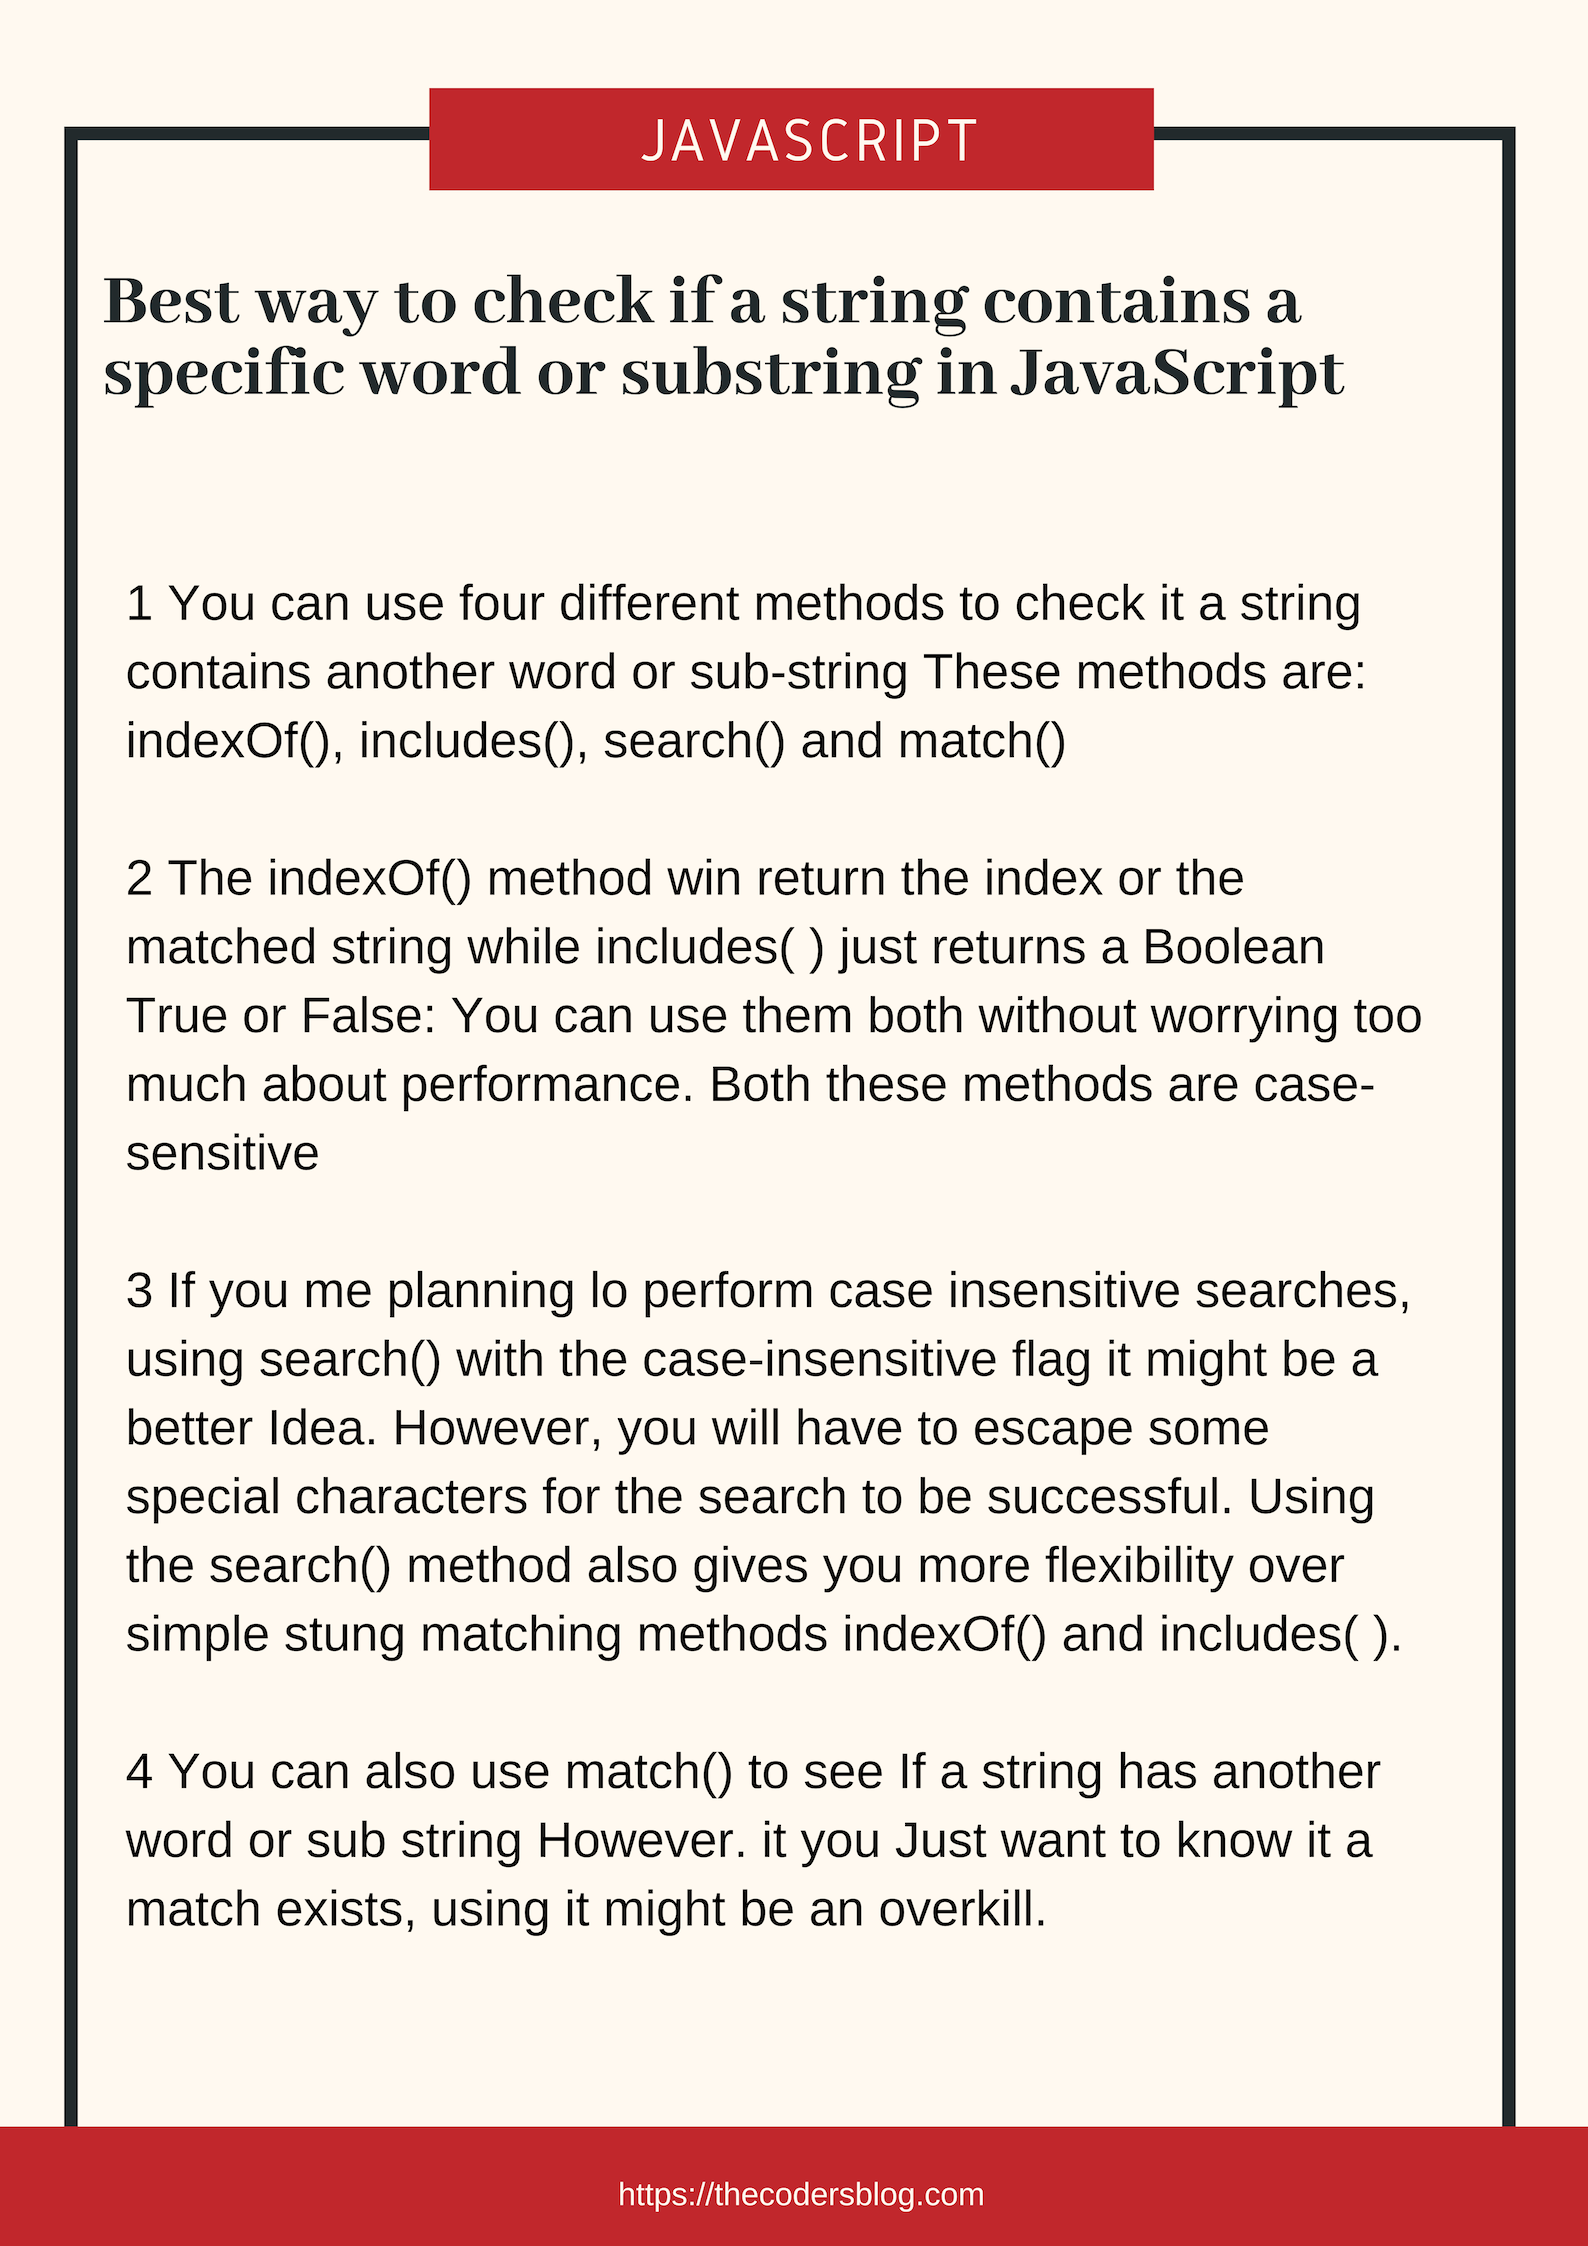 Best way to check if a string contains a specific word or substring in JavaScript